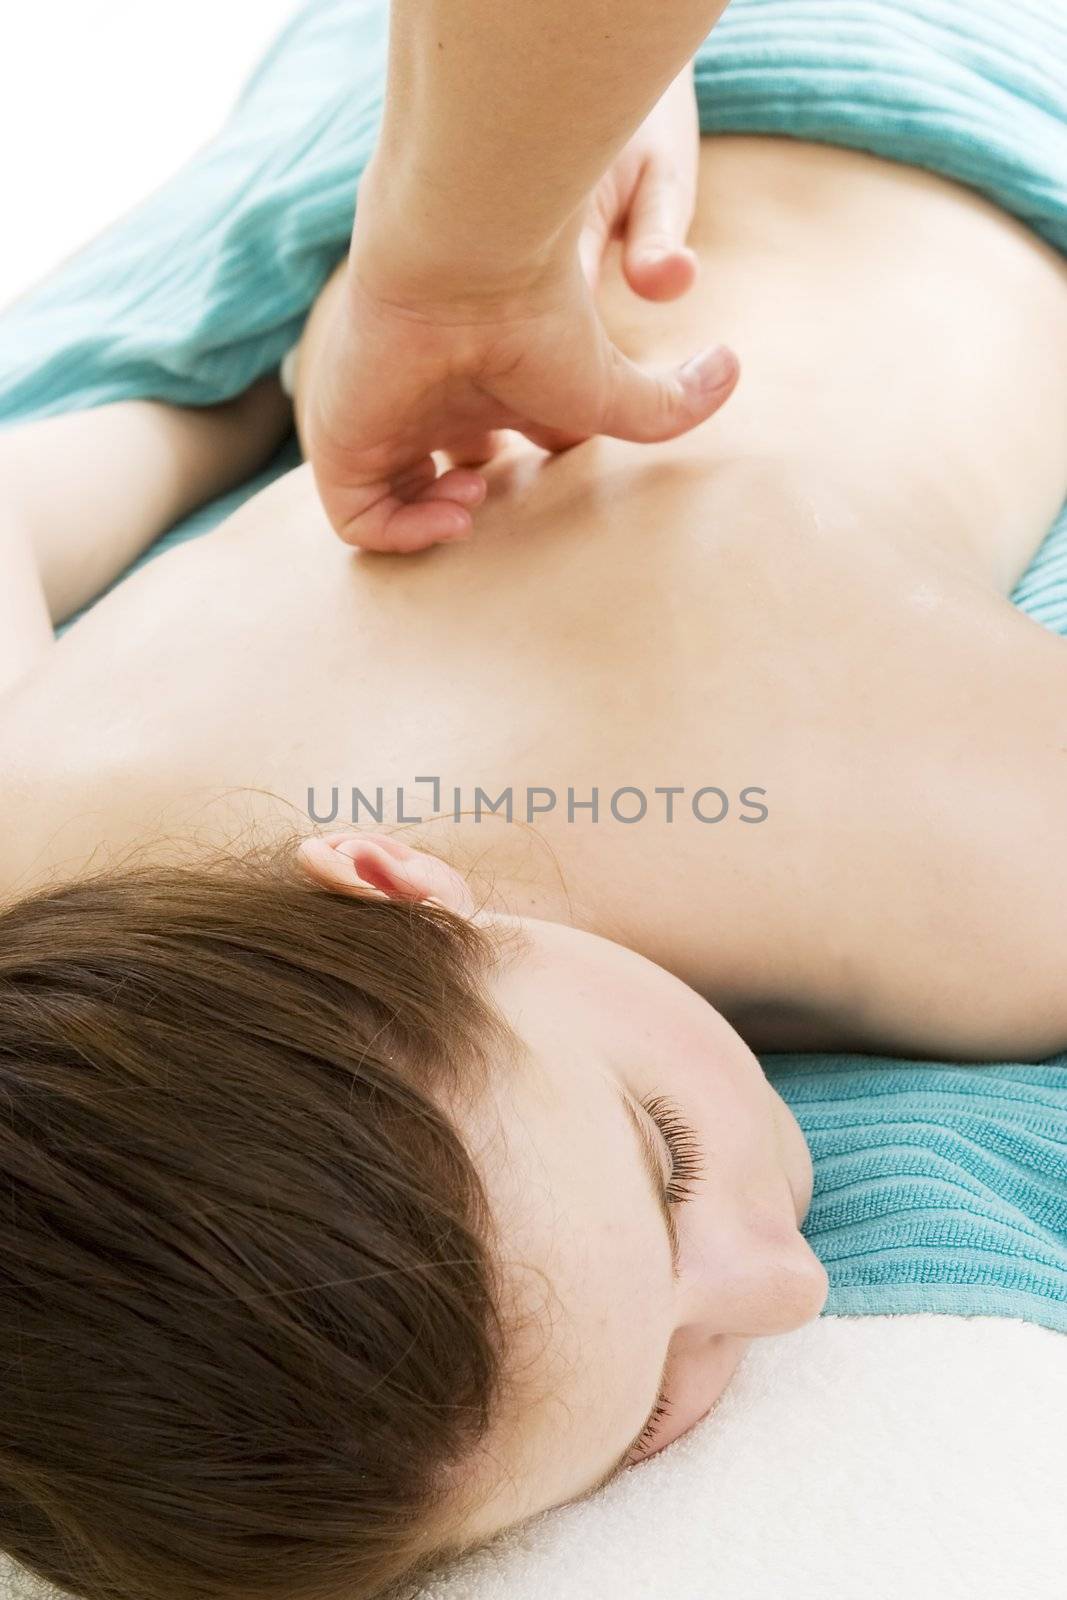 Detail image of a back massage at a beauty spa.